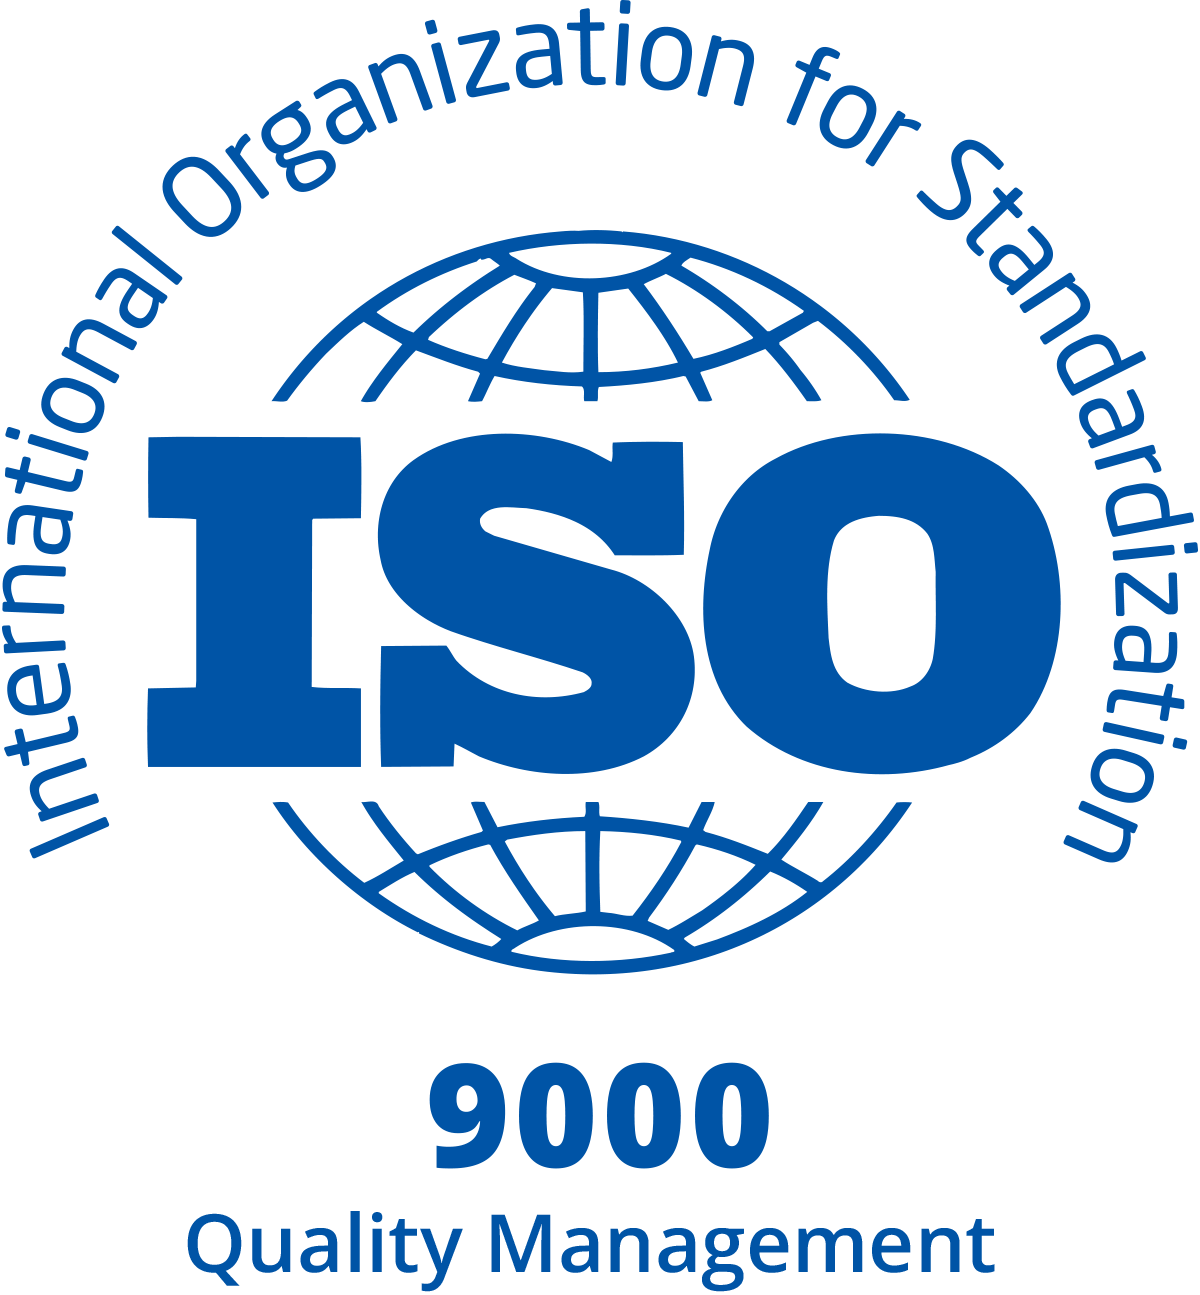  ISO 9000 Definition Arena